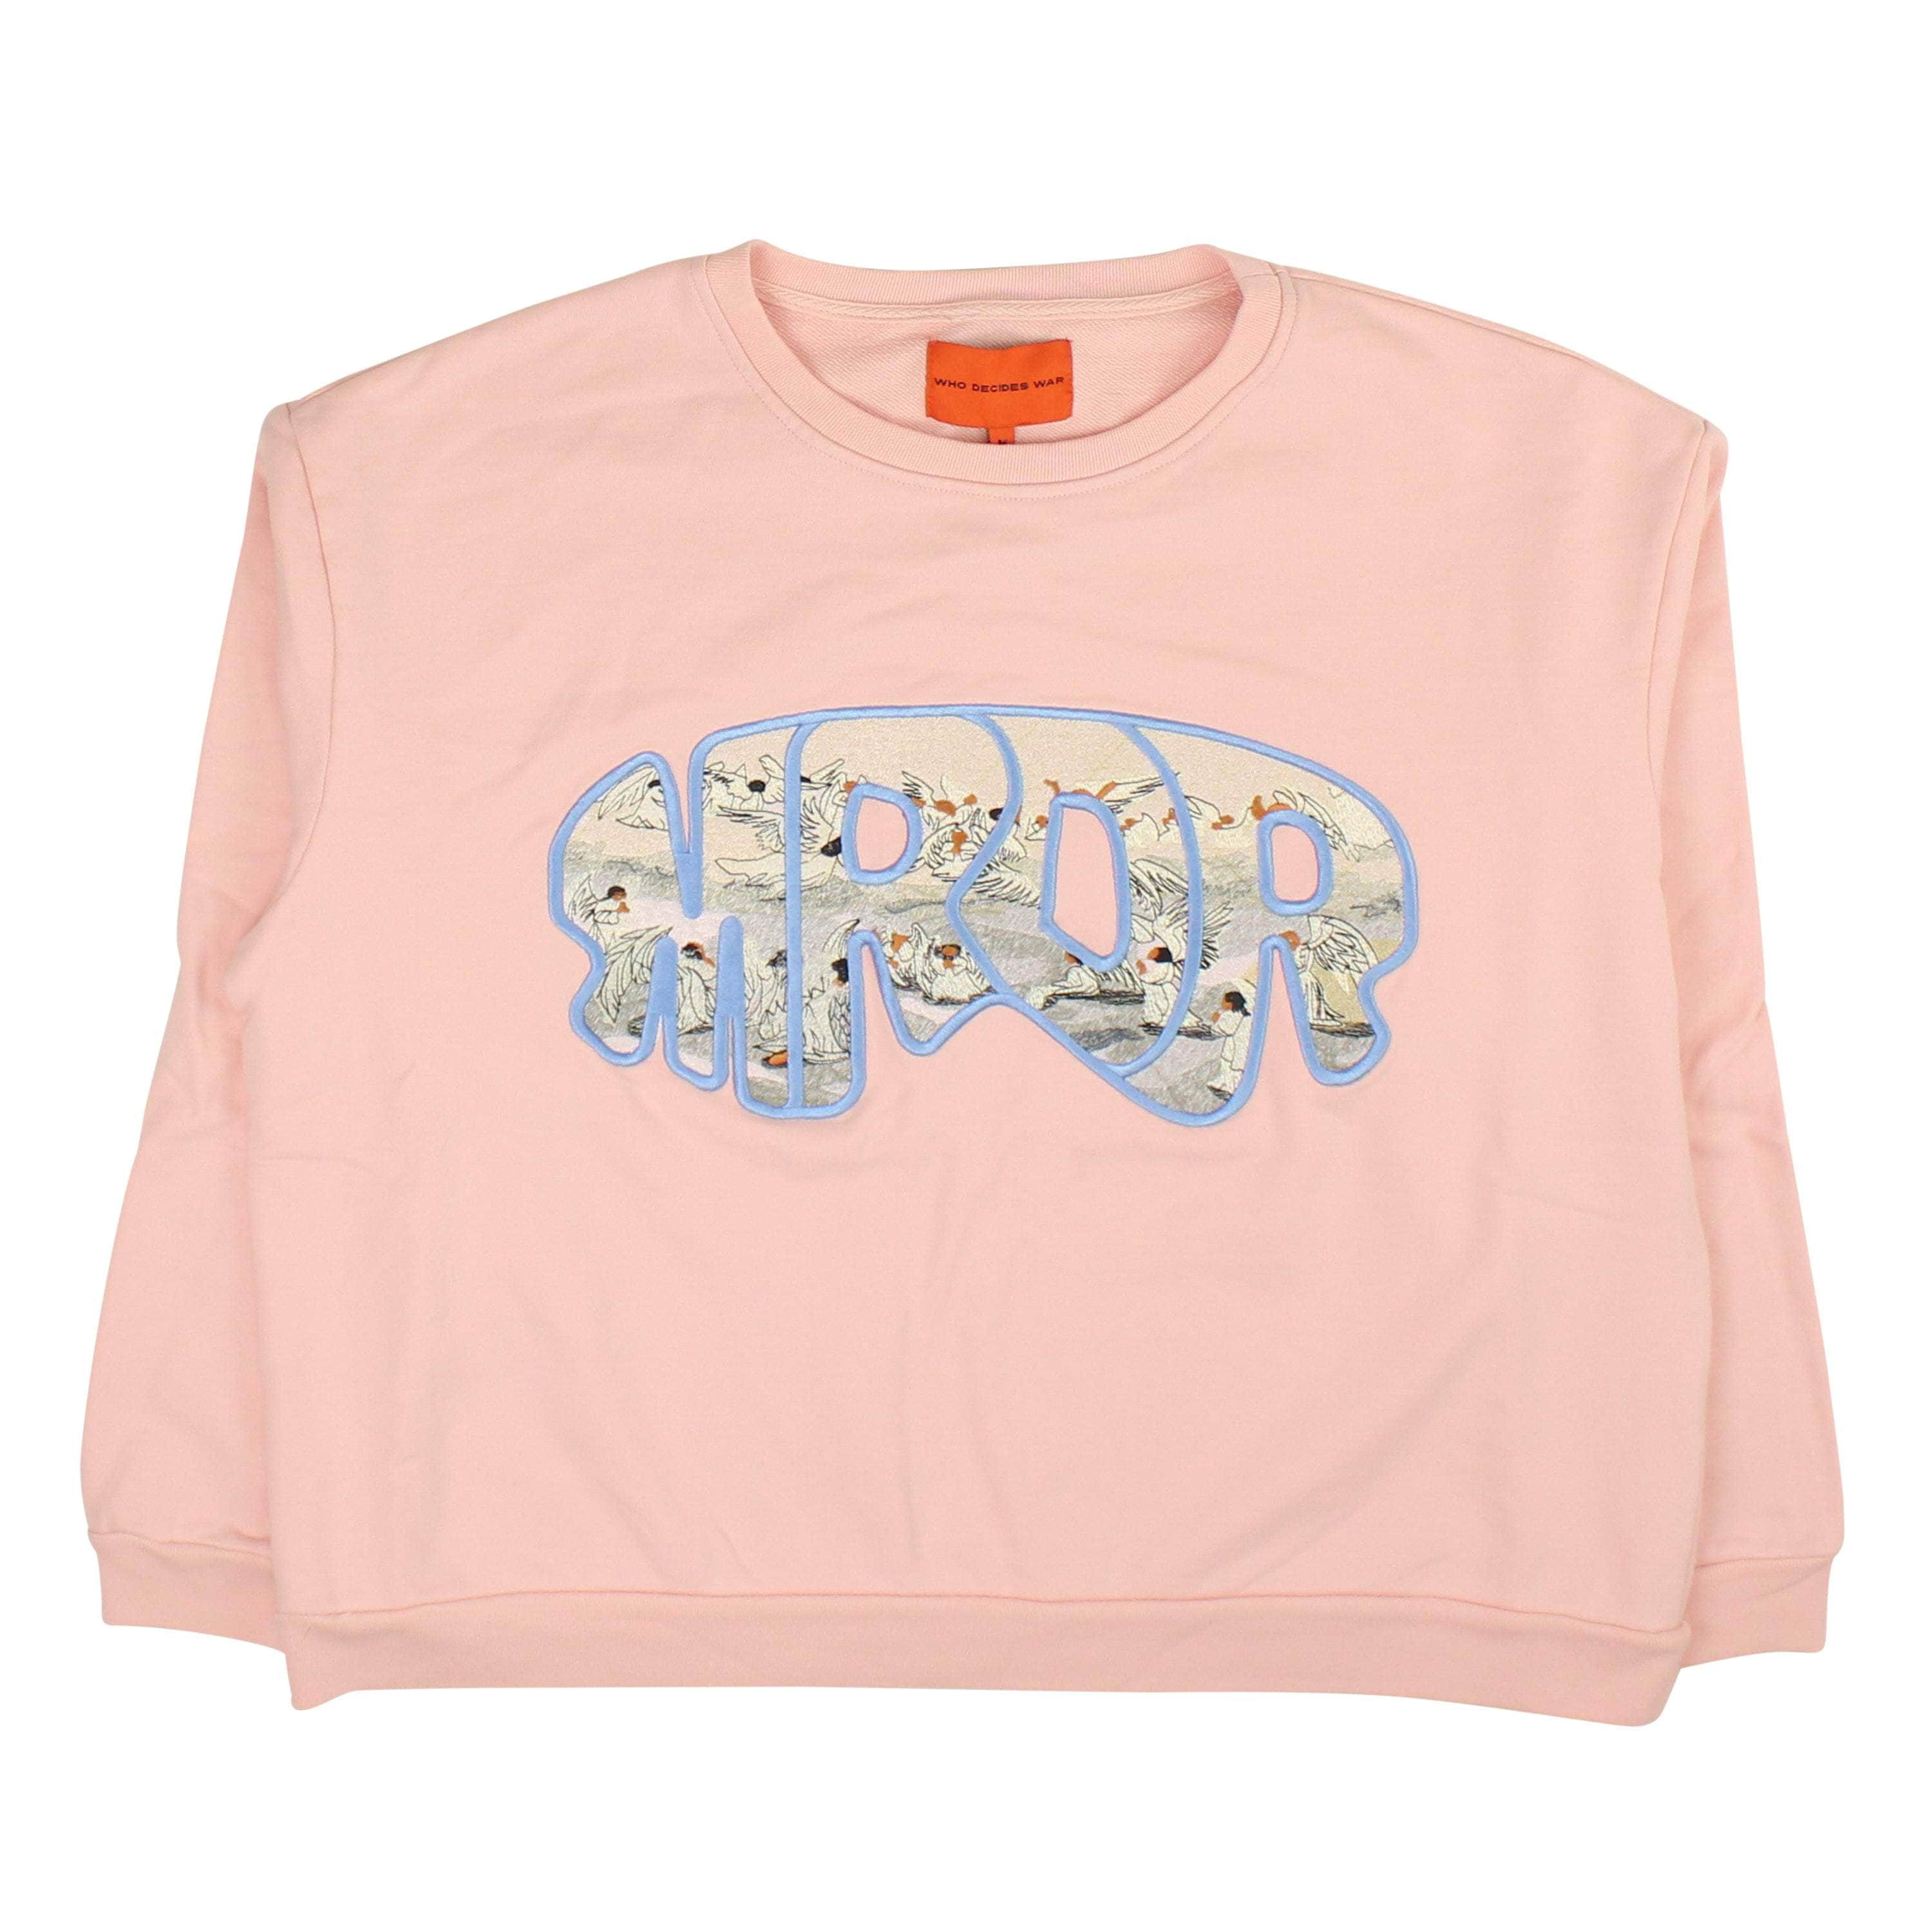 Who Decides War 250-500, channelenable-all, chicmi, couponcollection, main-clothing, shop375, who-decides-war Pink MRDR Crewneck sweater